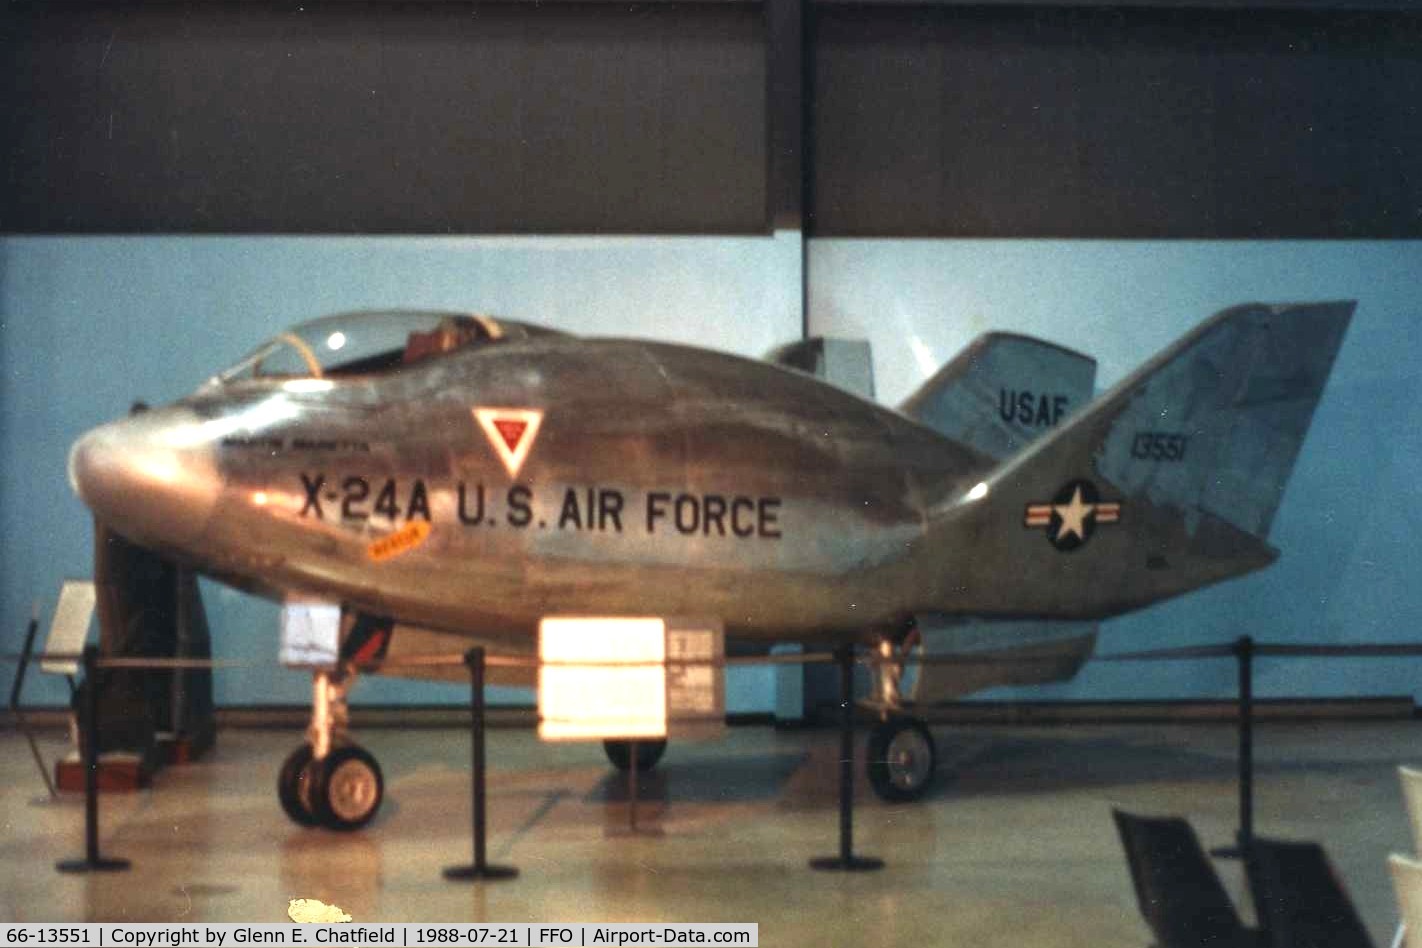 66-13551, Martin Marietta X-24A (SV-5J) C/N 2, SV-5J modified to look like an X-24A.  Development aircraft for the X-24 program.  Located now at the National Museum of the U.S. Air Force. S/N is bogus